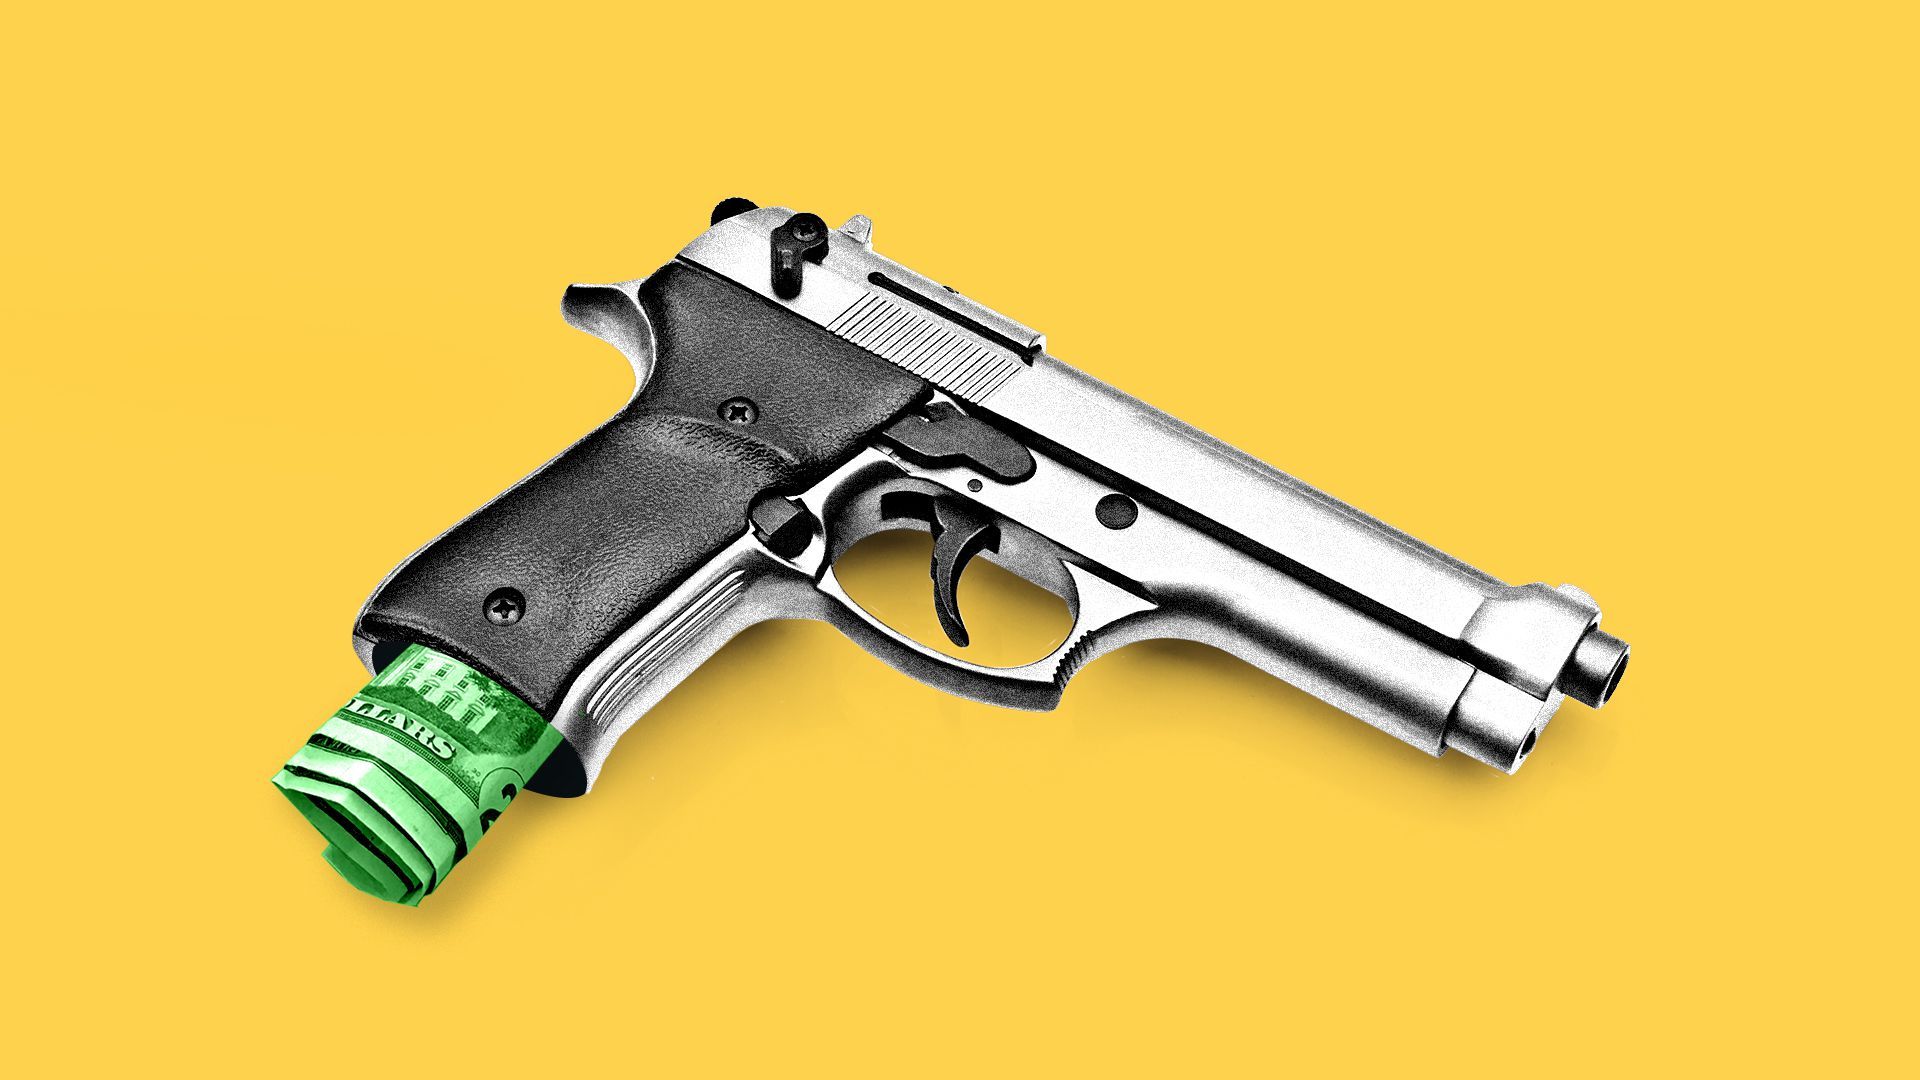 Illustration of gun being loaded with money.